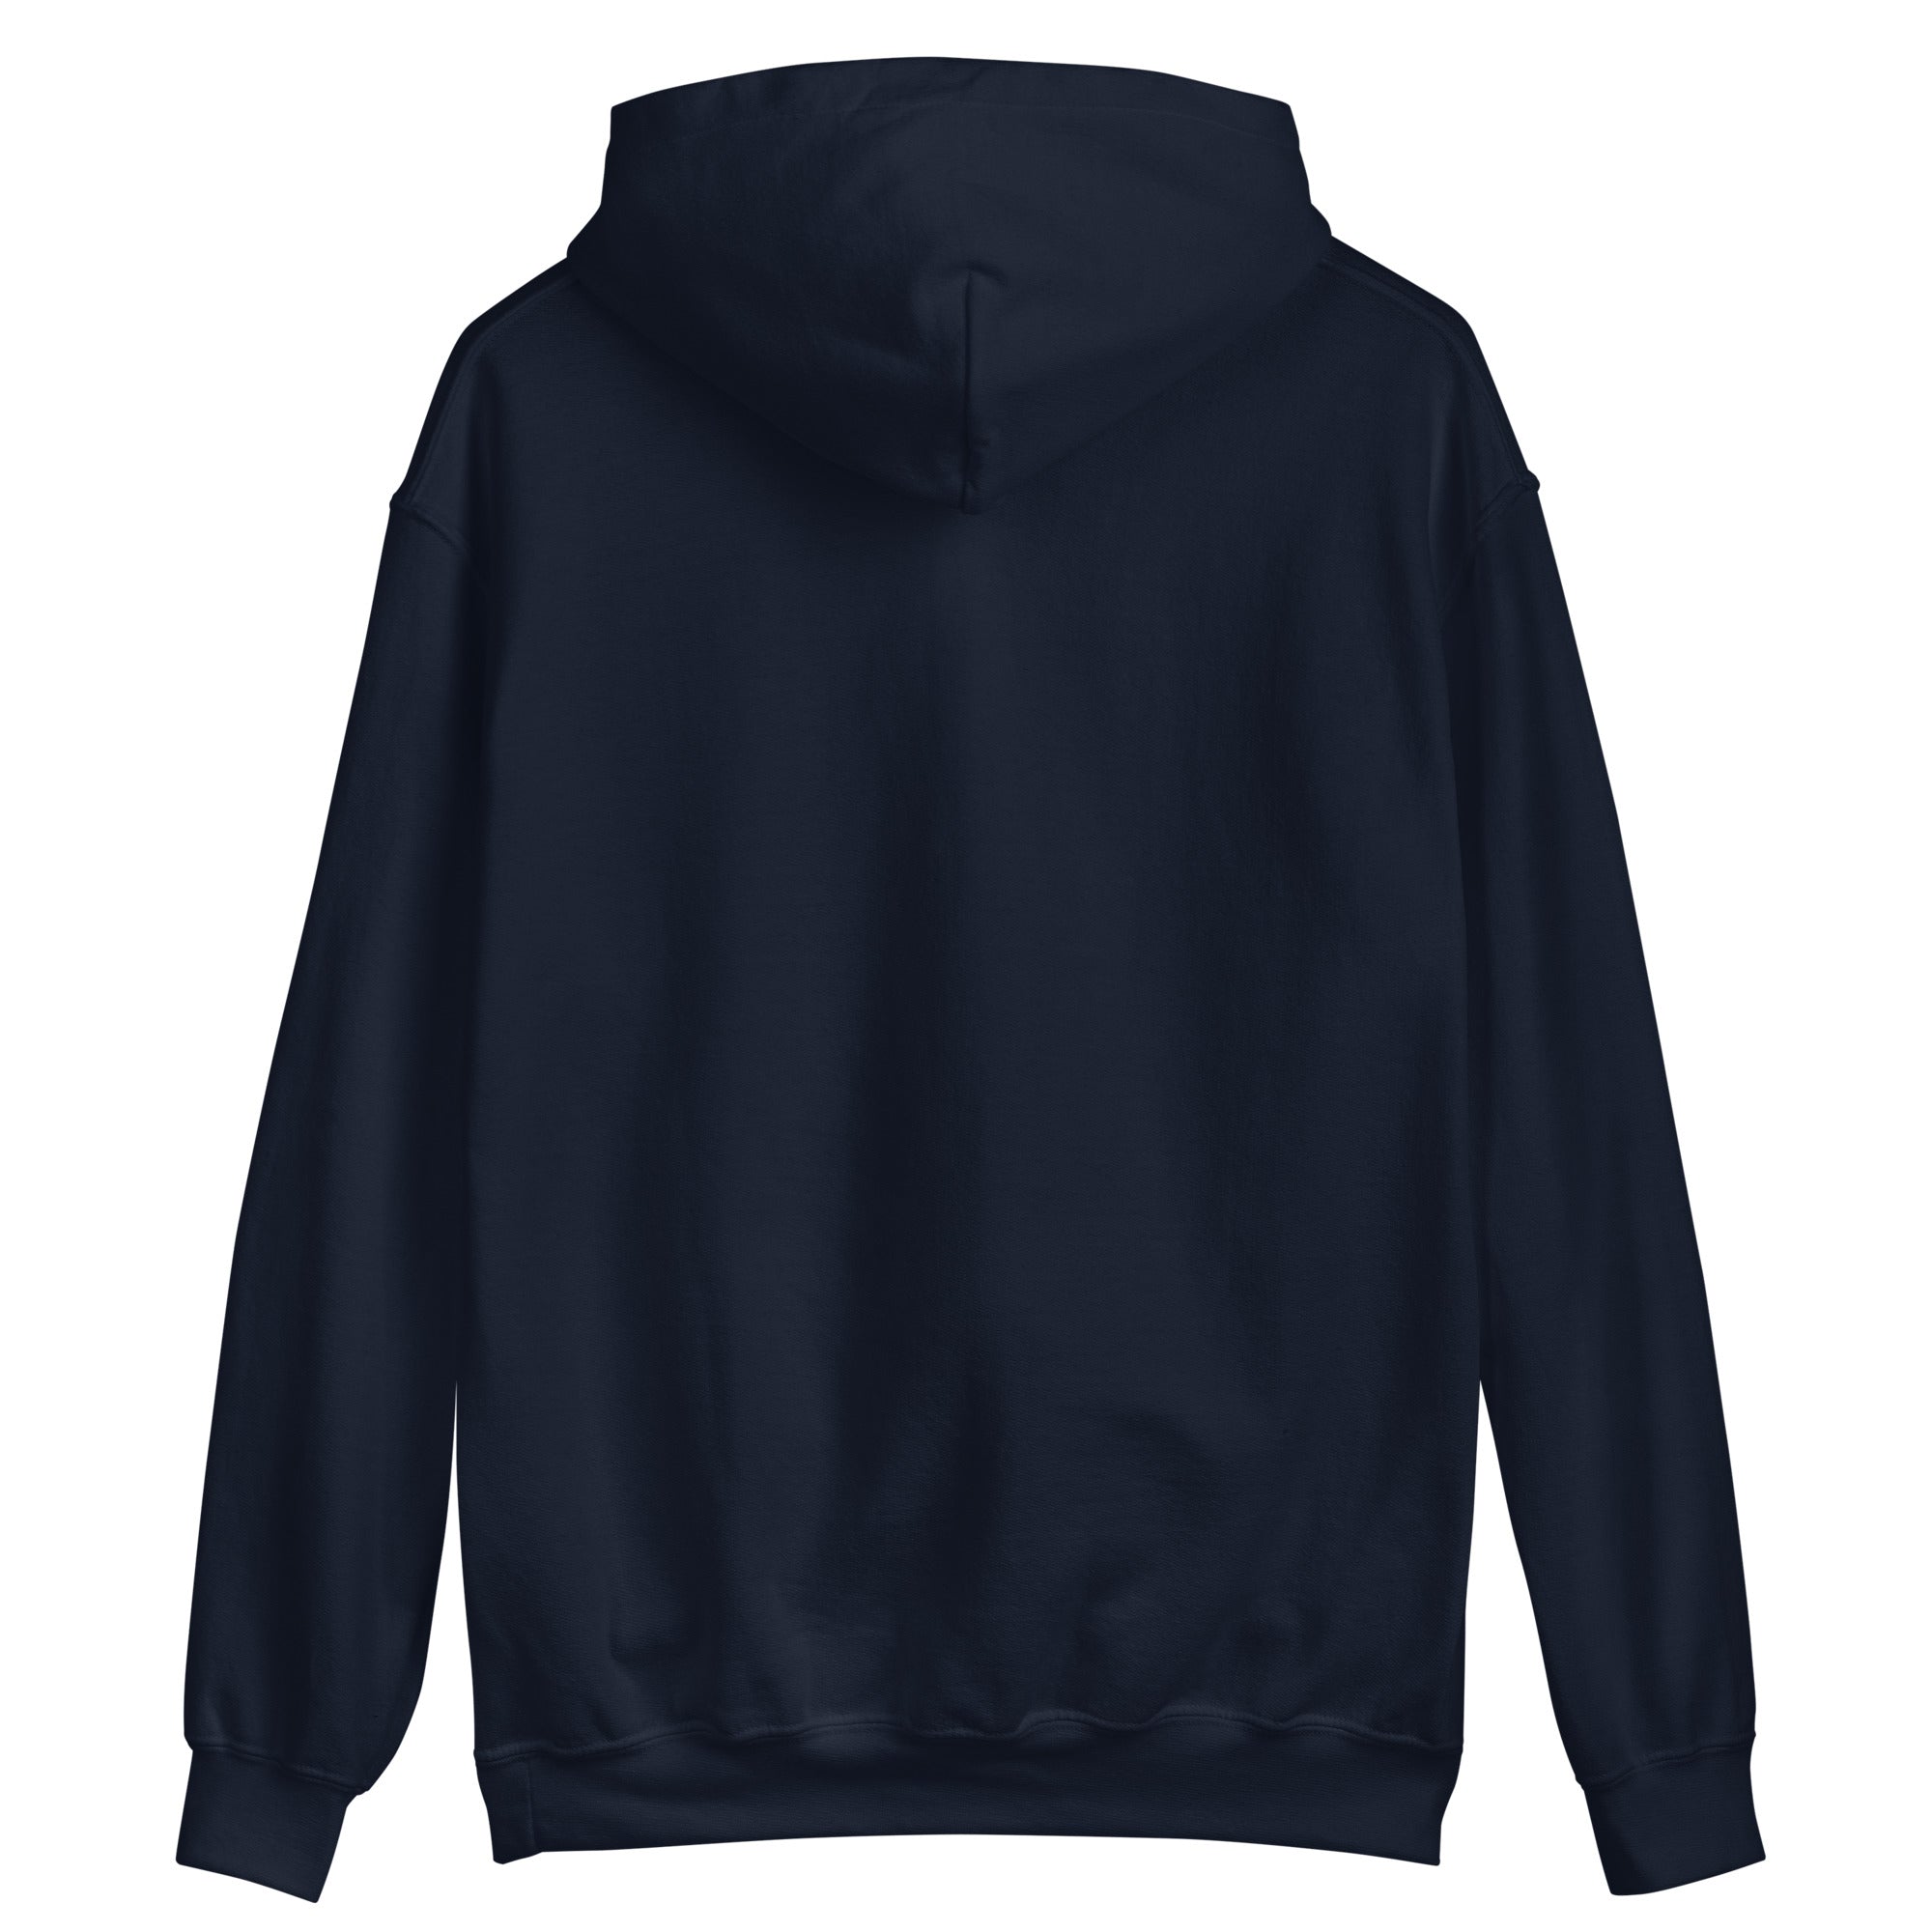 WeAR Colours Hoodie - Navy (Adults)